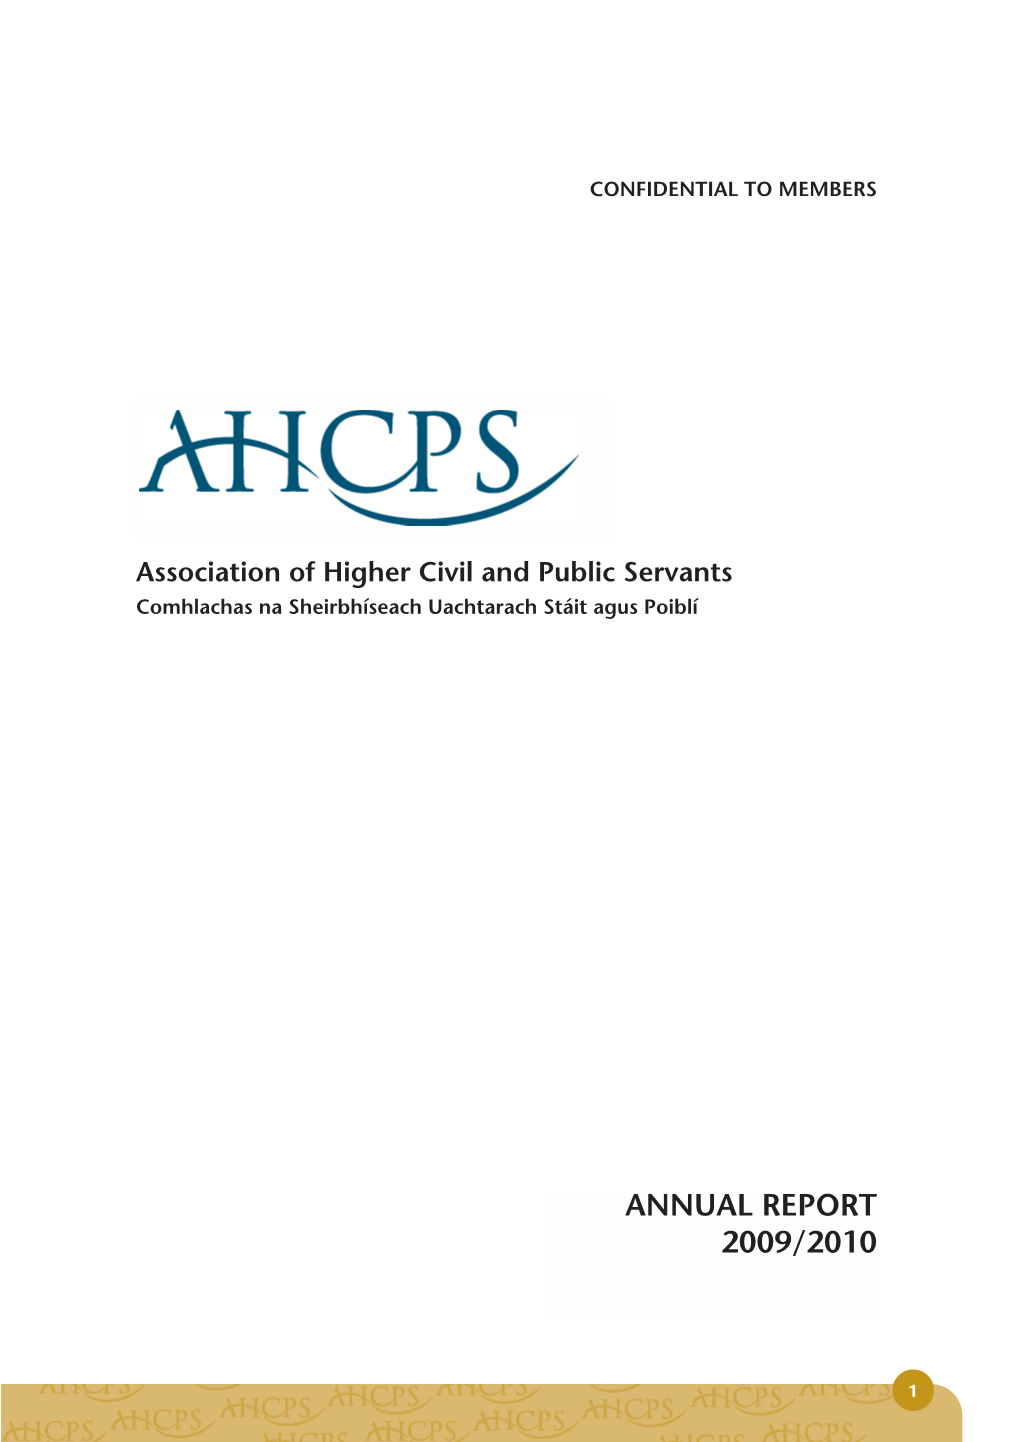 AHCPS Annual Report 2008/2009